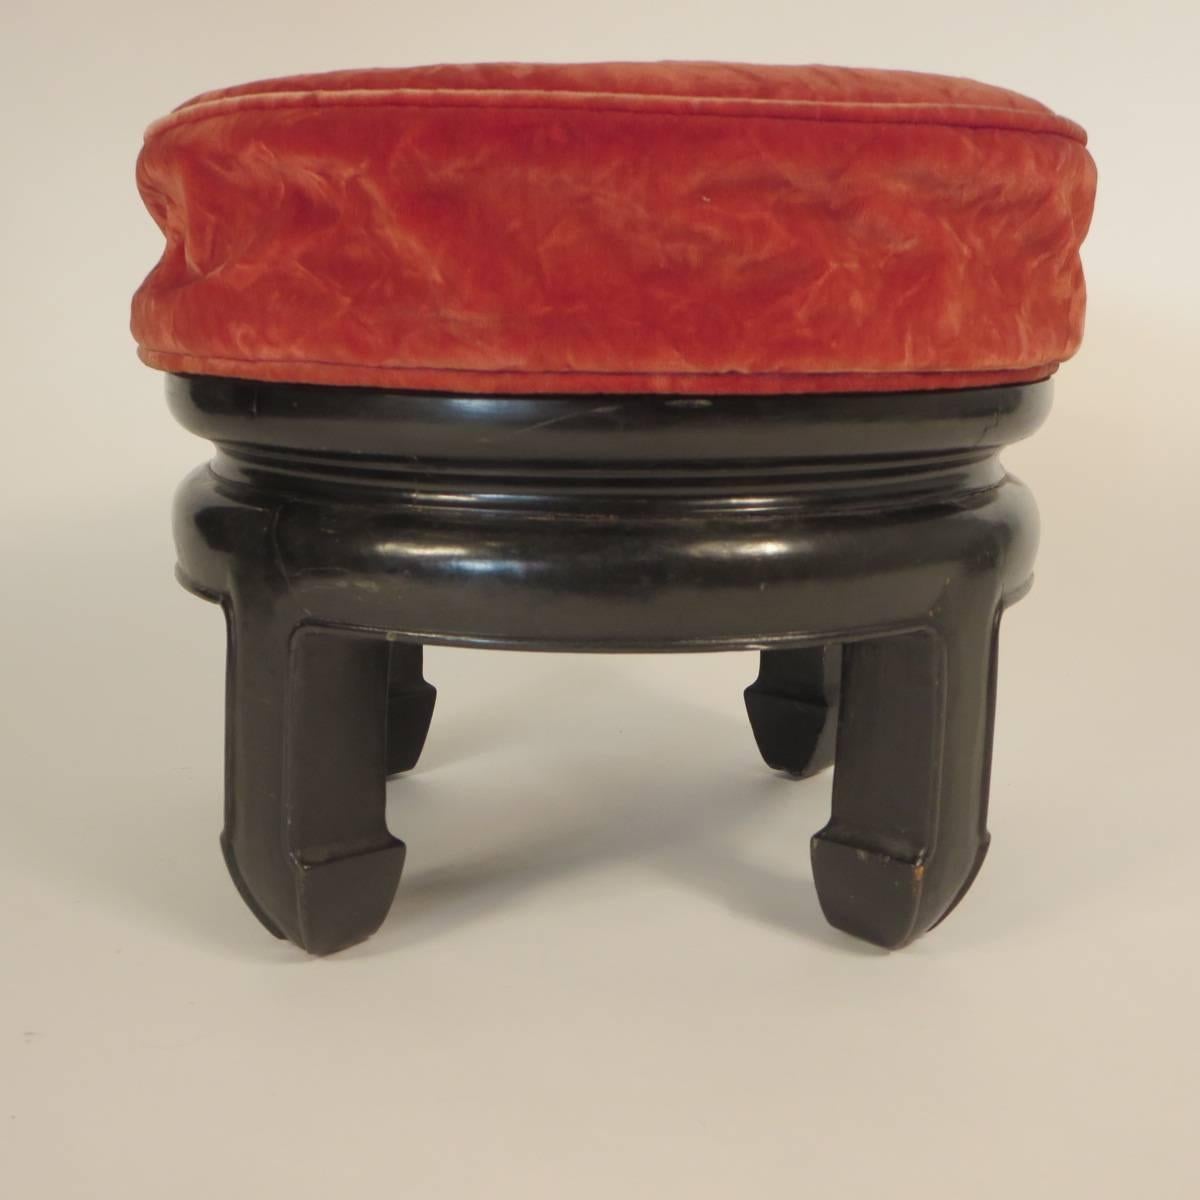 1950s Asian footstool. The top swivels.